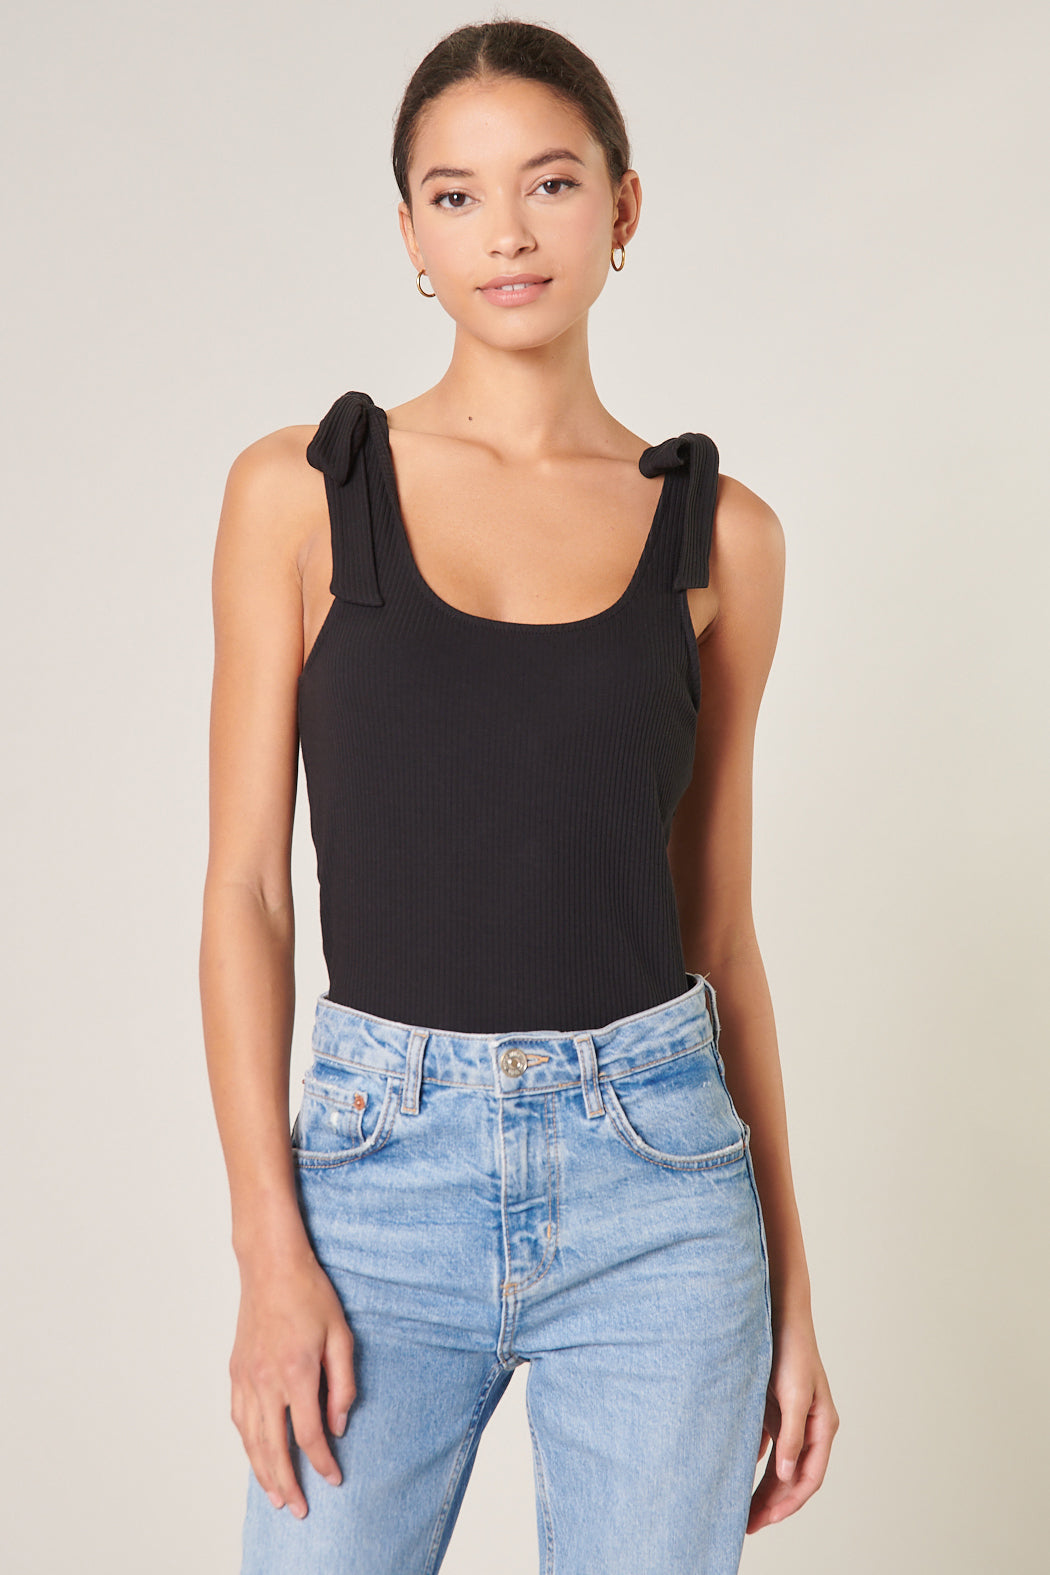 Tyndall Top – Sleeveless Spring Top with Scoop Neck and Knit-Like Ribbing  [Size-Inclusive] - Knits 'N Knots